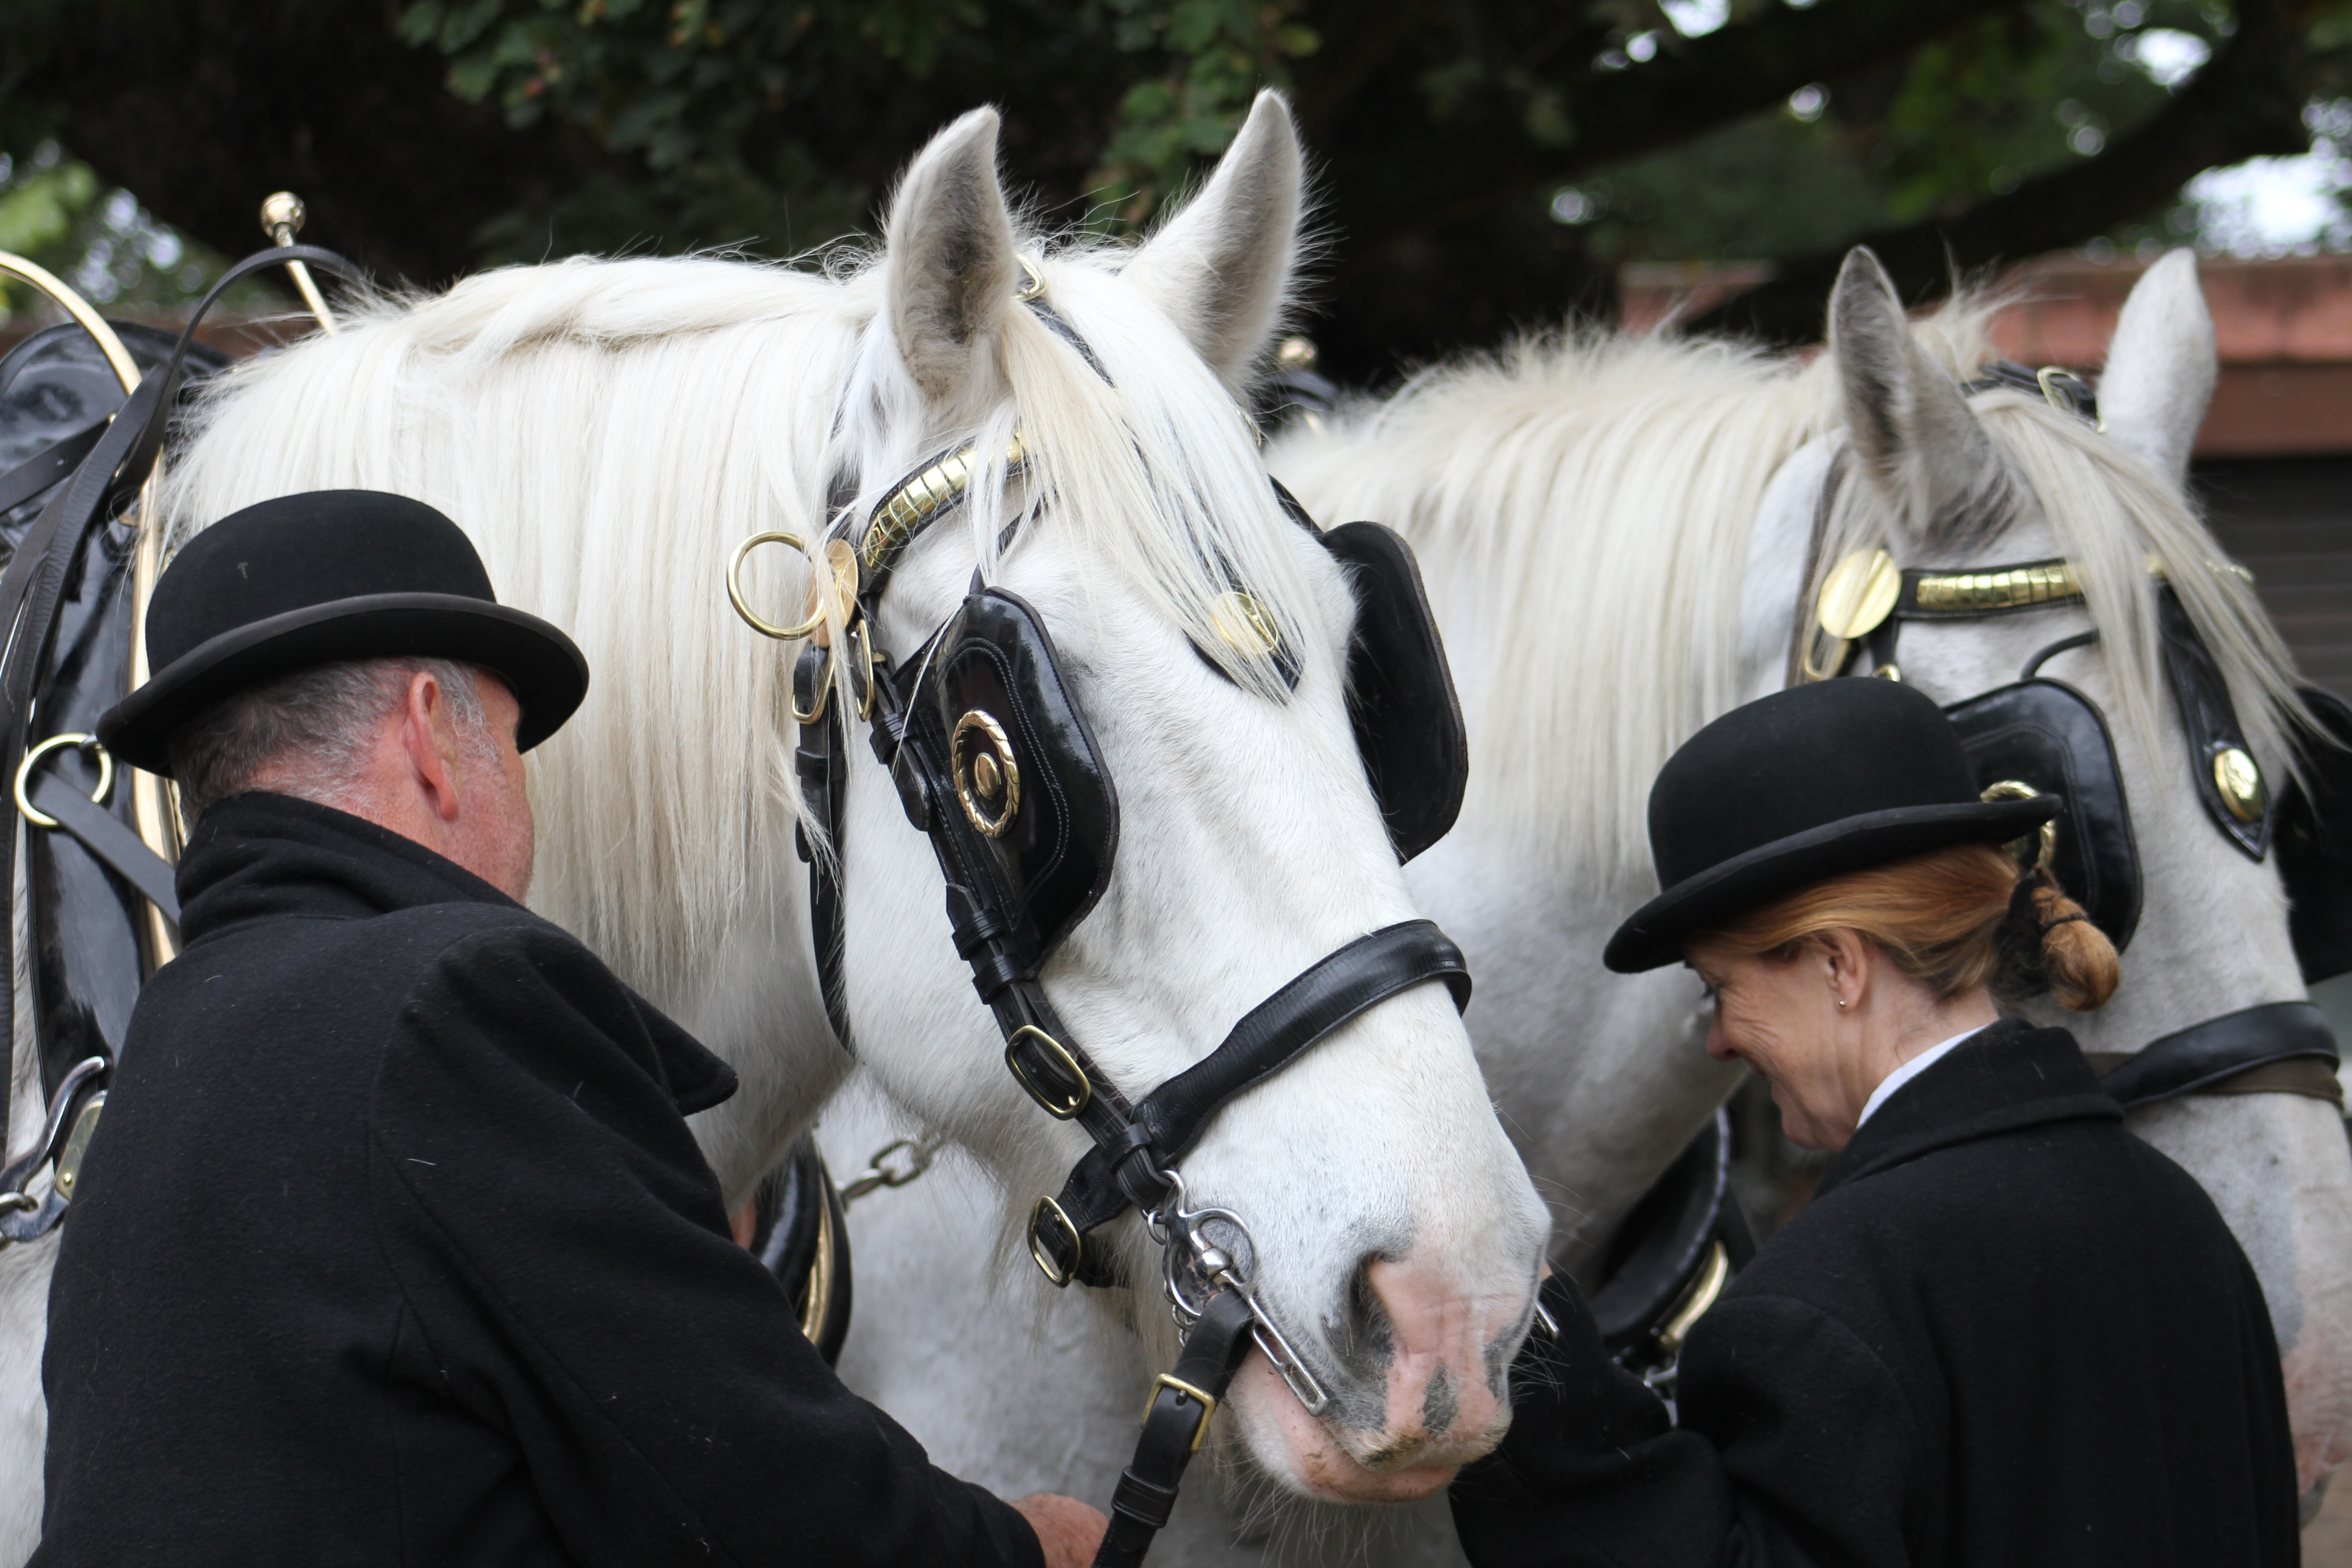 Shire horse carriage rides in Richmond Park